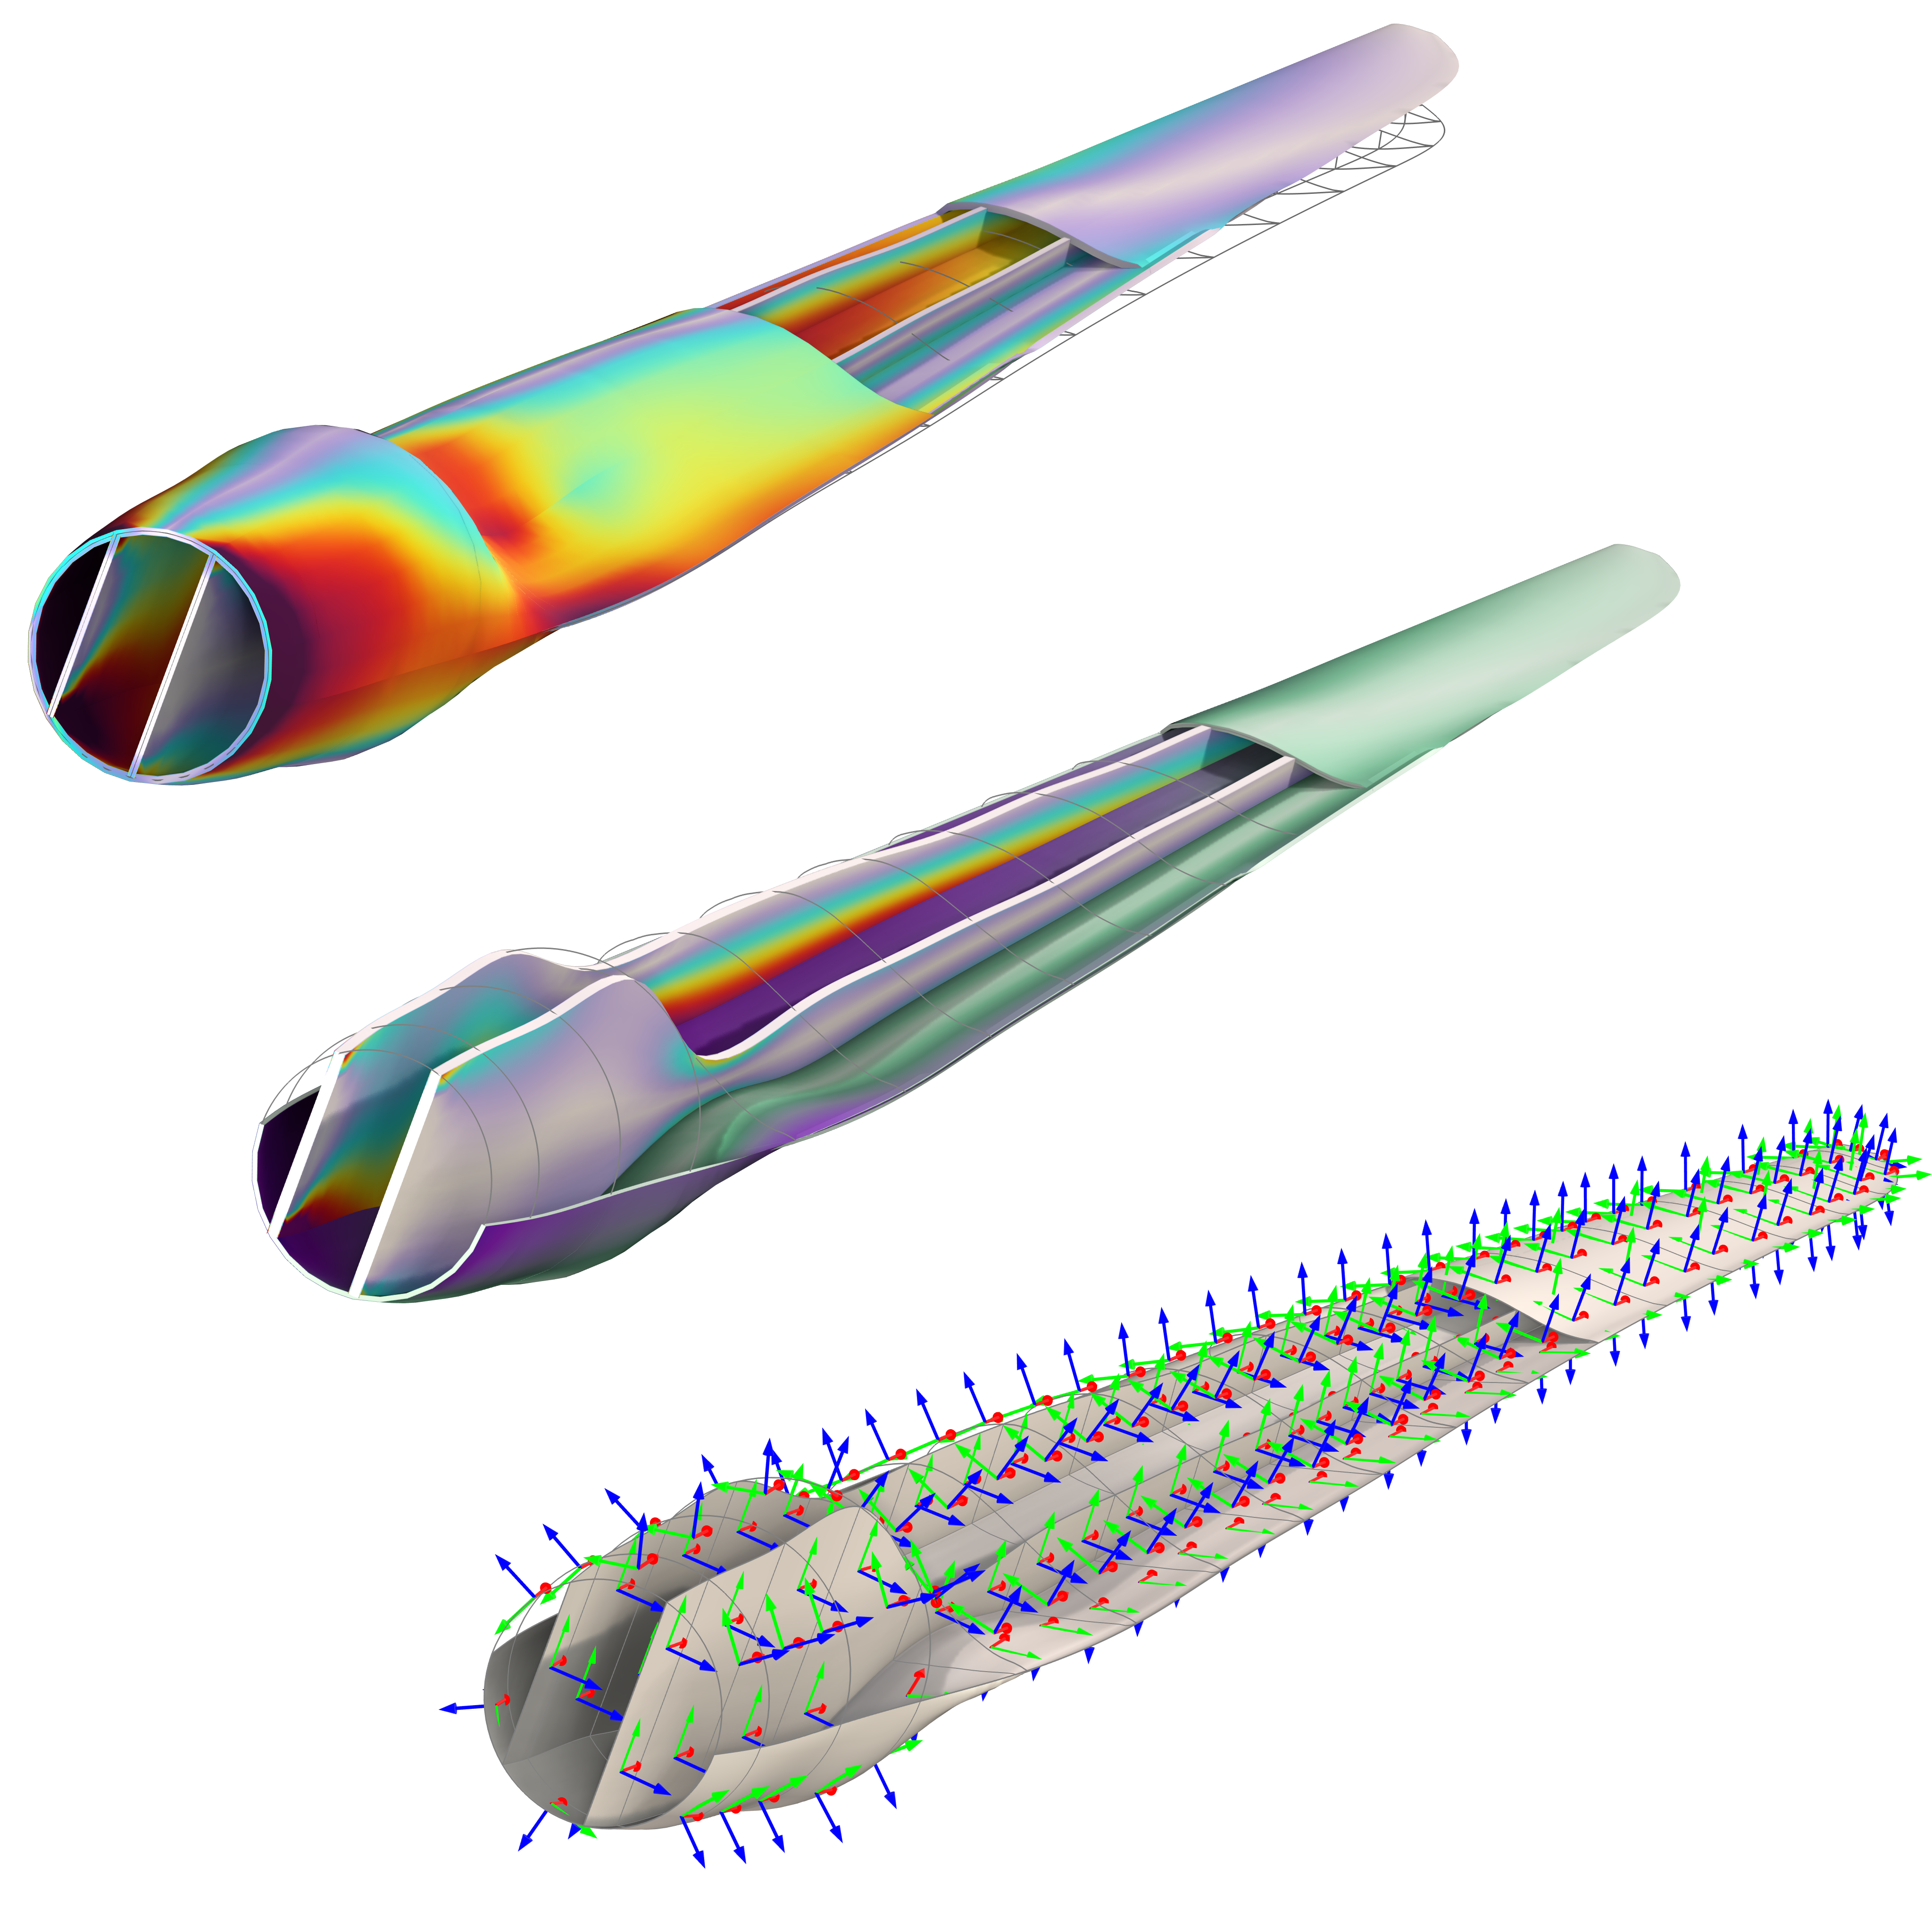 Three wind turbine blades showing the stress on the skin (left), stress on the spars (middle), and the shell local coordinate system (right).